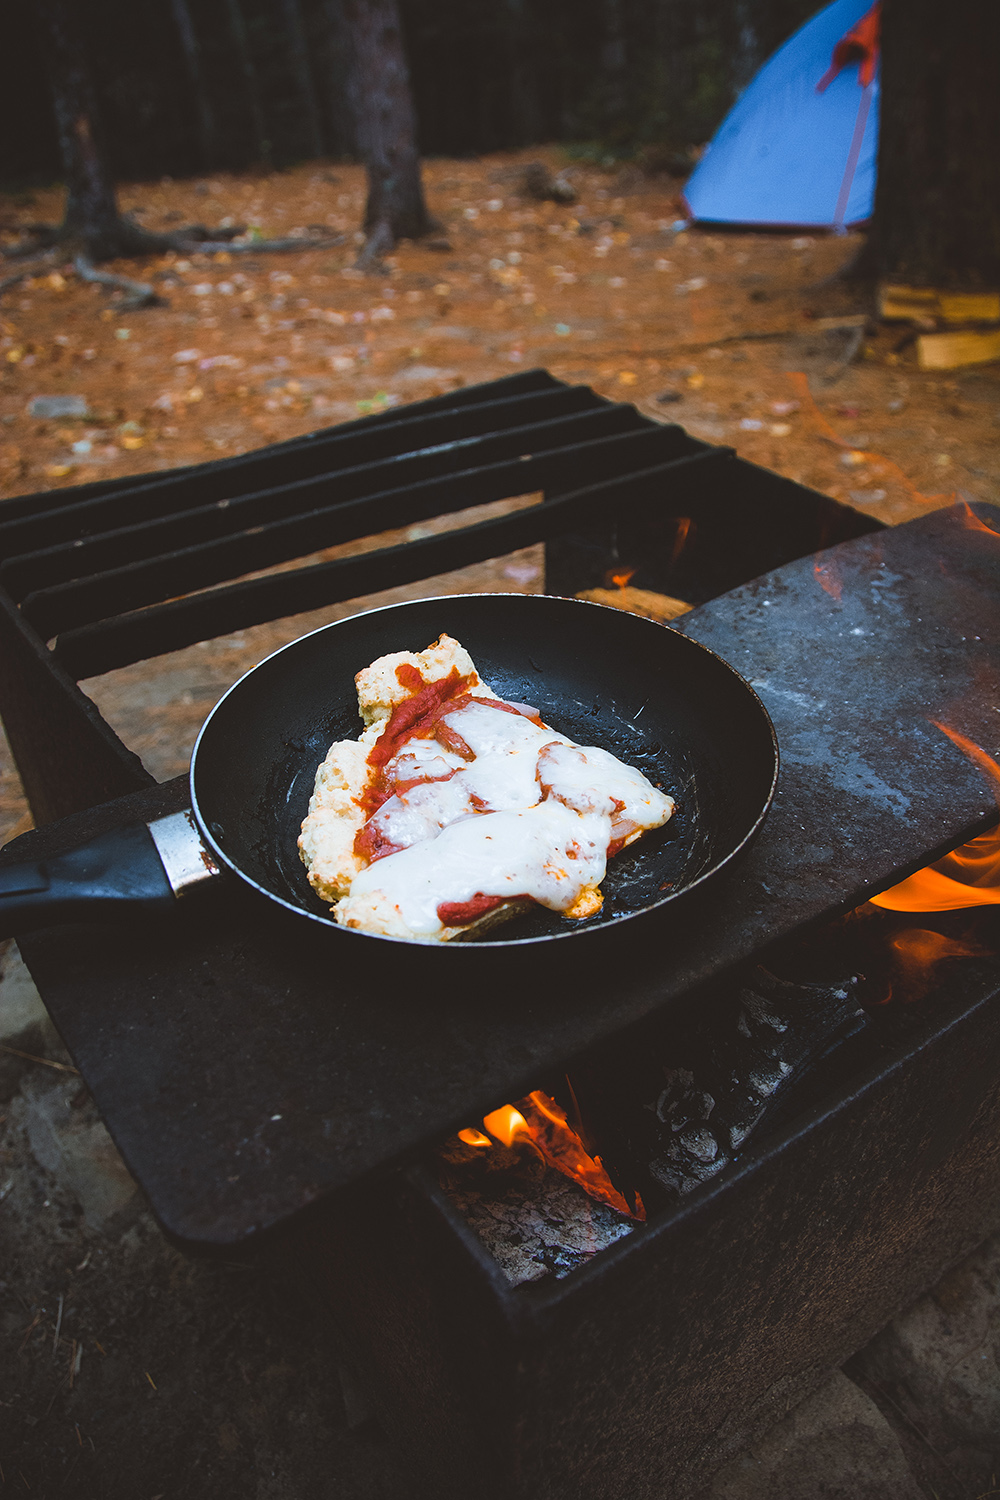 Measuring a campfire’s cooking temperature is easy with the hand test